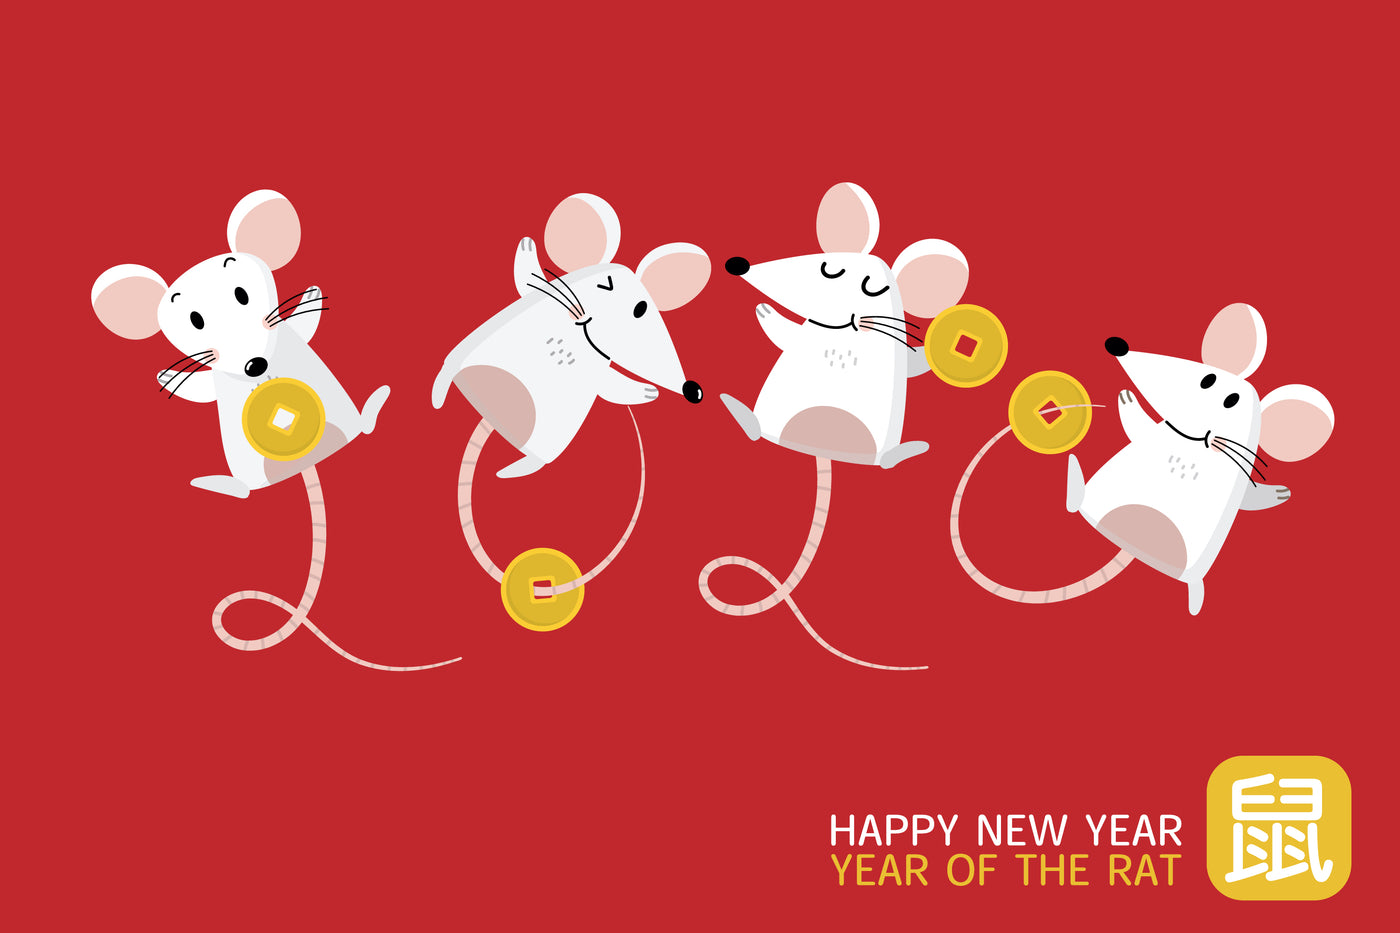 Chinese New Year 2020: The Year of the Rat